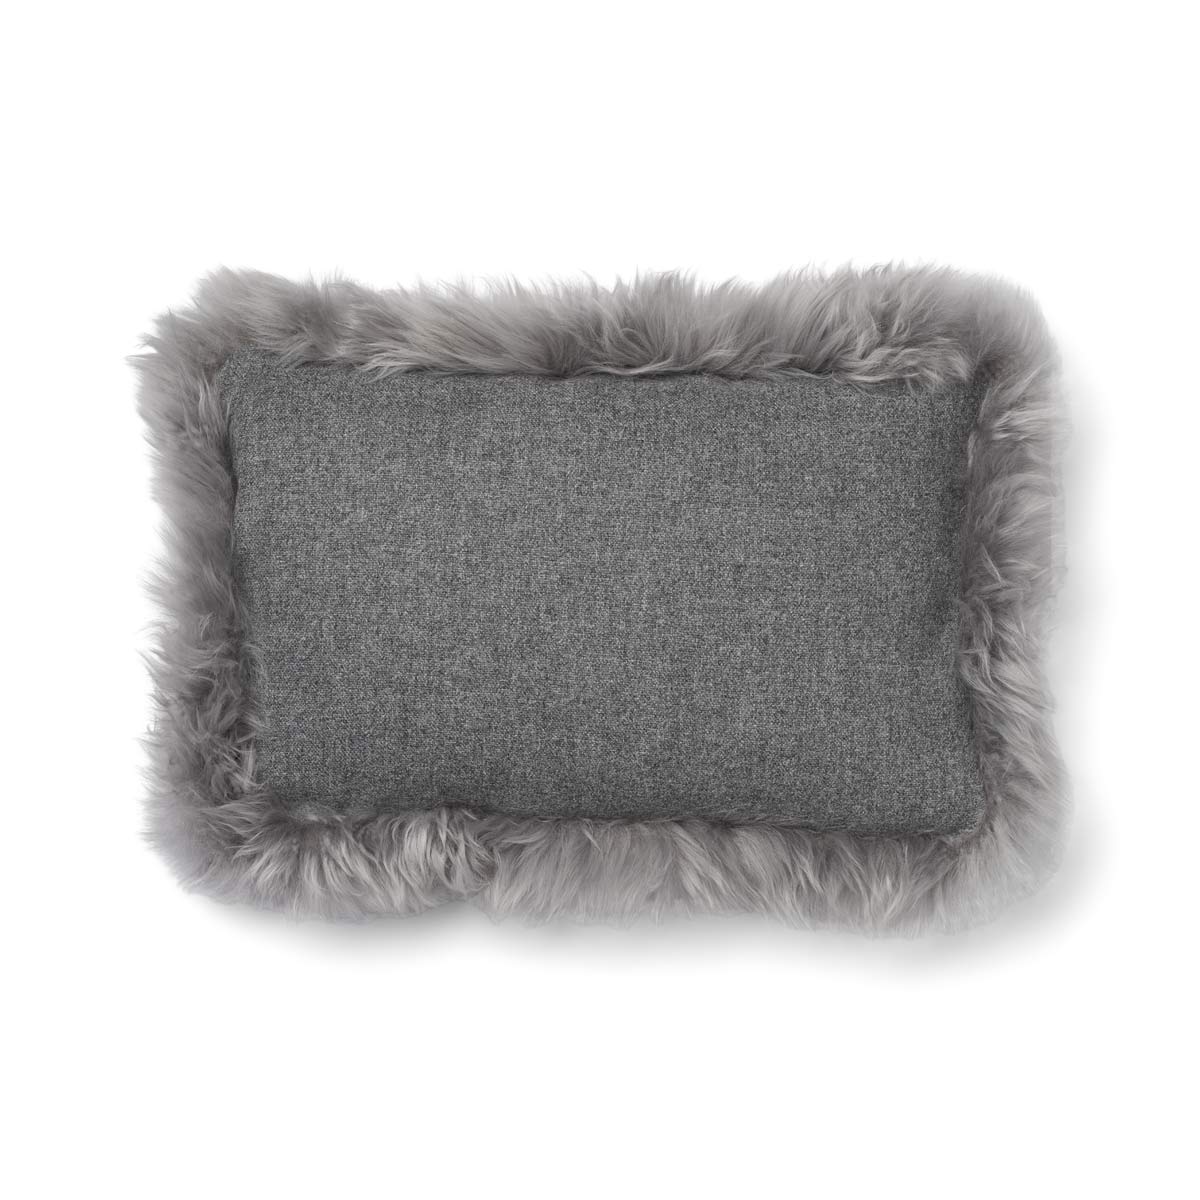 Classic Collection, Doublesided 100%  Wool Cushion and LW New Zealand Sheepskin Trimming. Size: 34x52 cm.